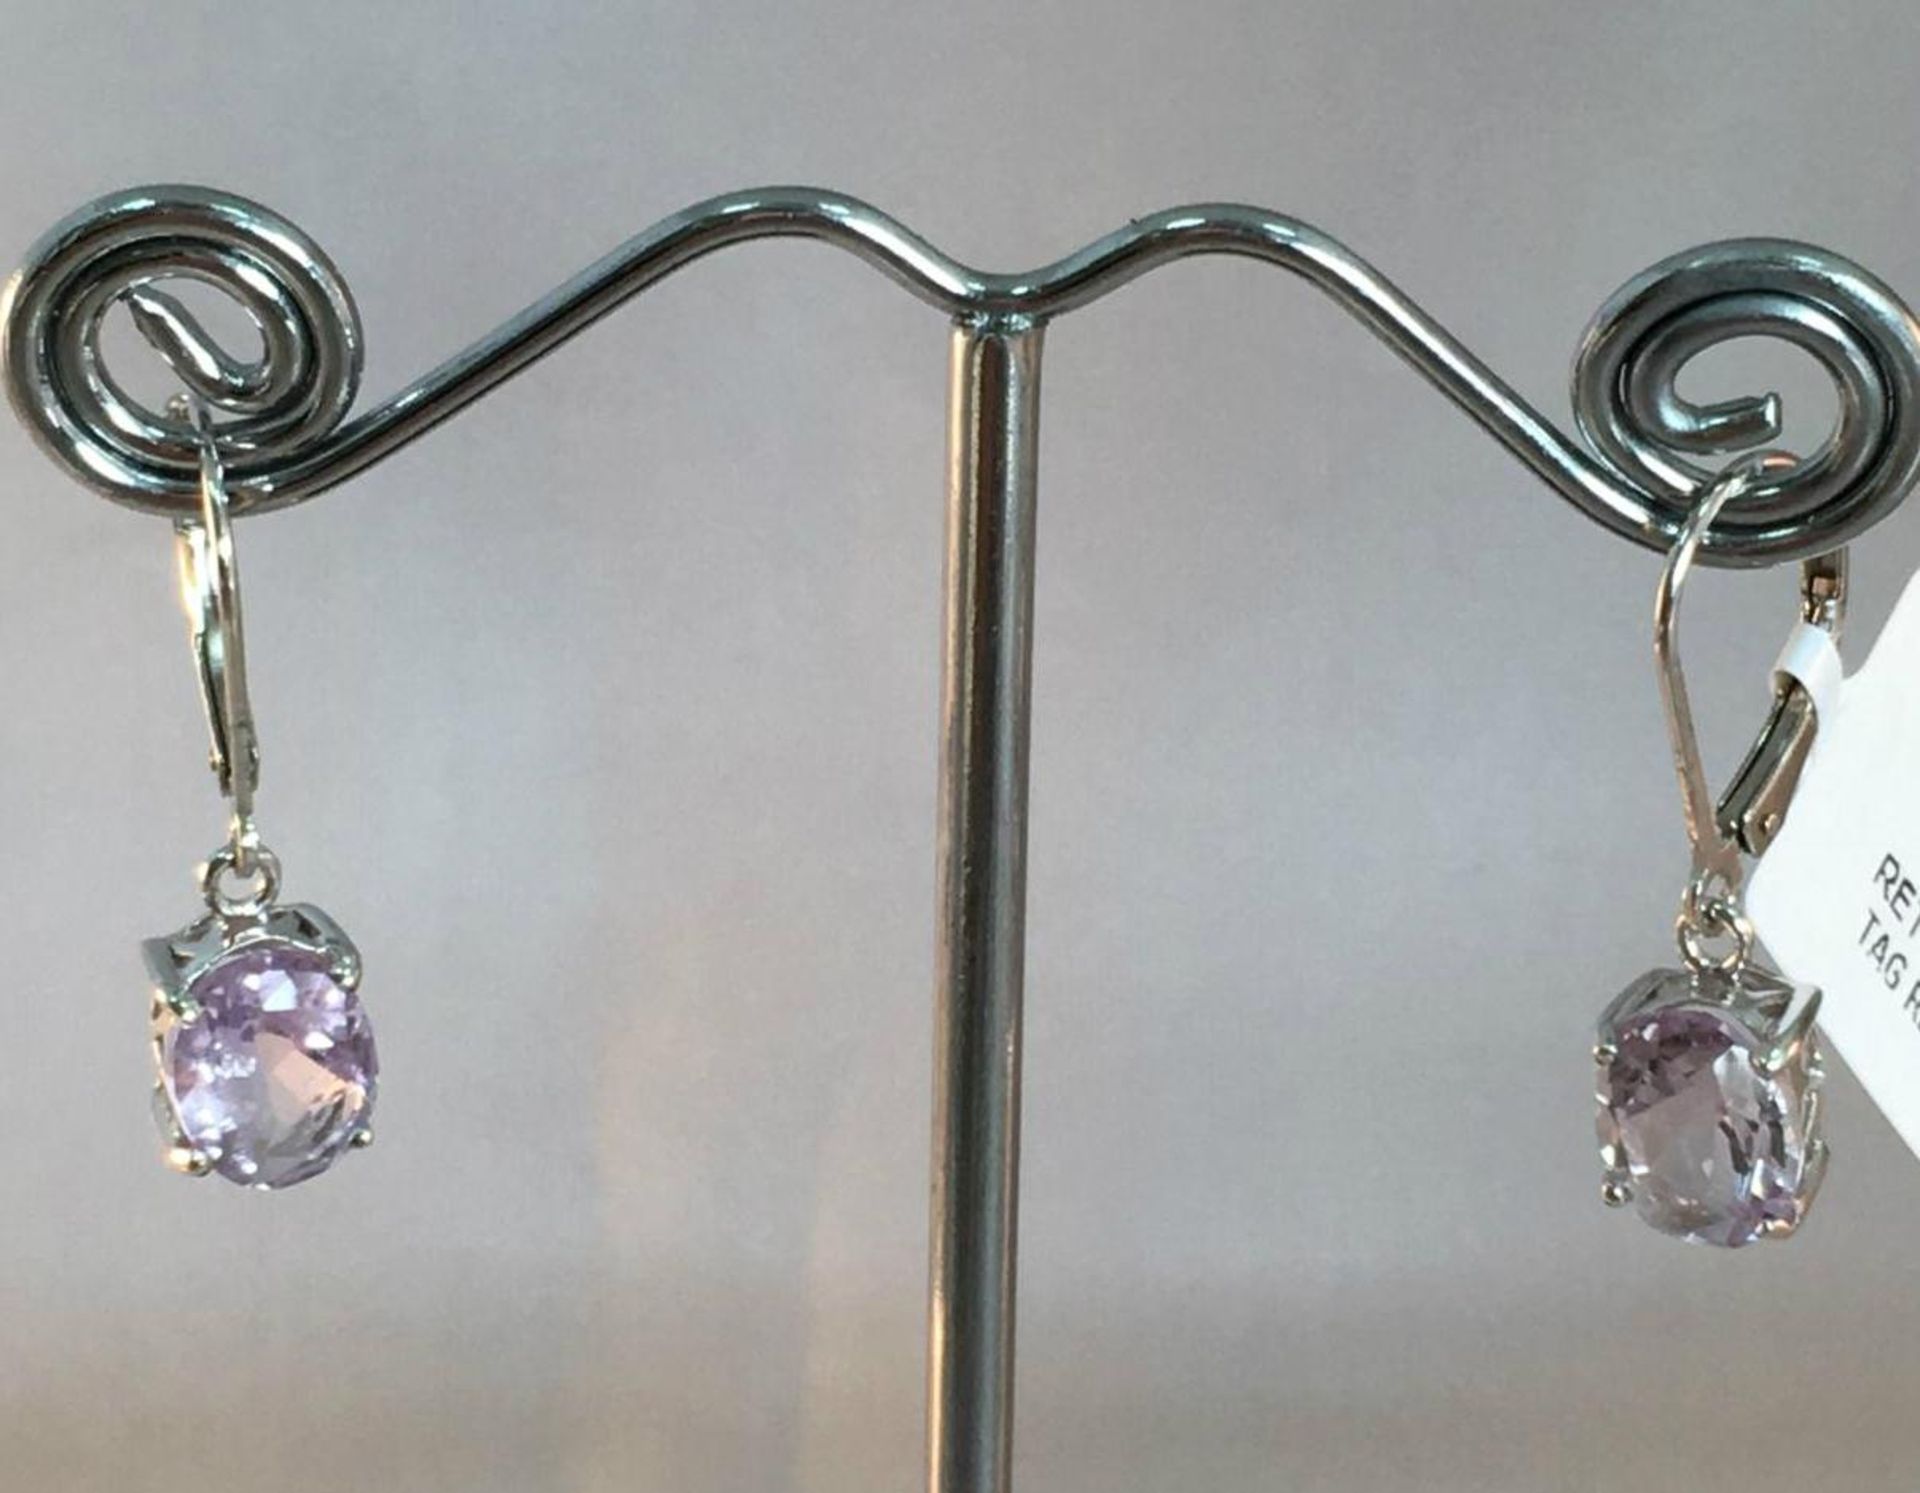 3ct Rose De France Amethyst Lever Back Earrings in Rhodium Plated 925 Silver. Includes free UK